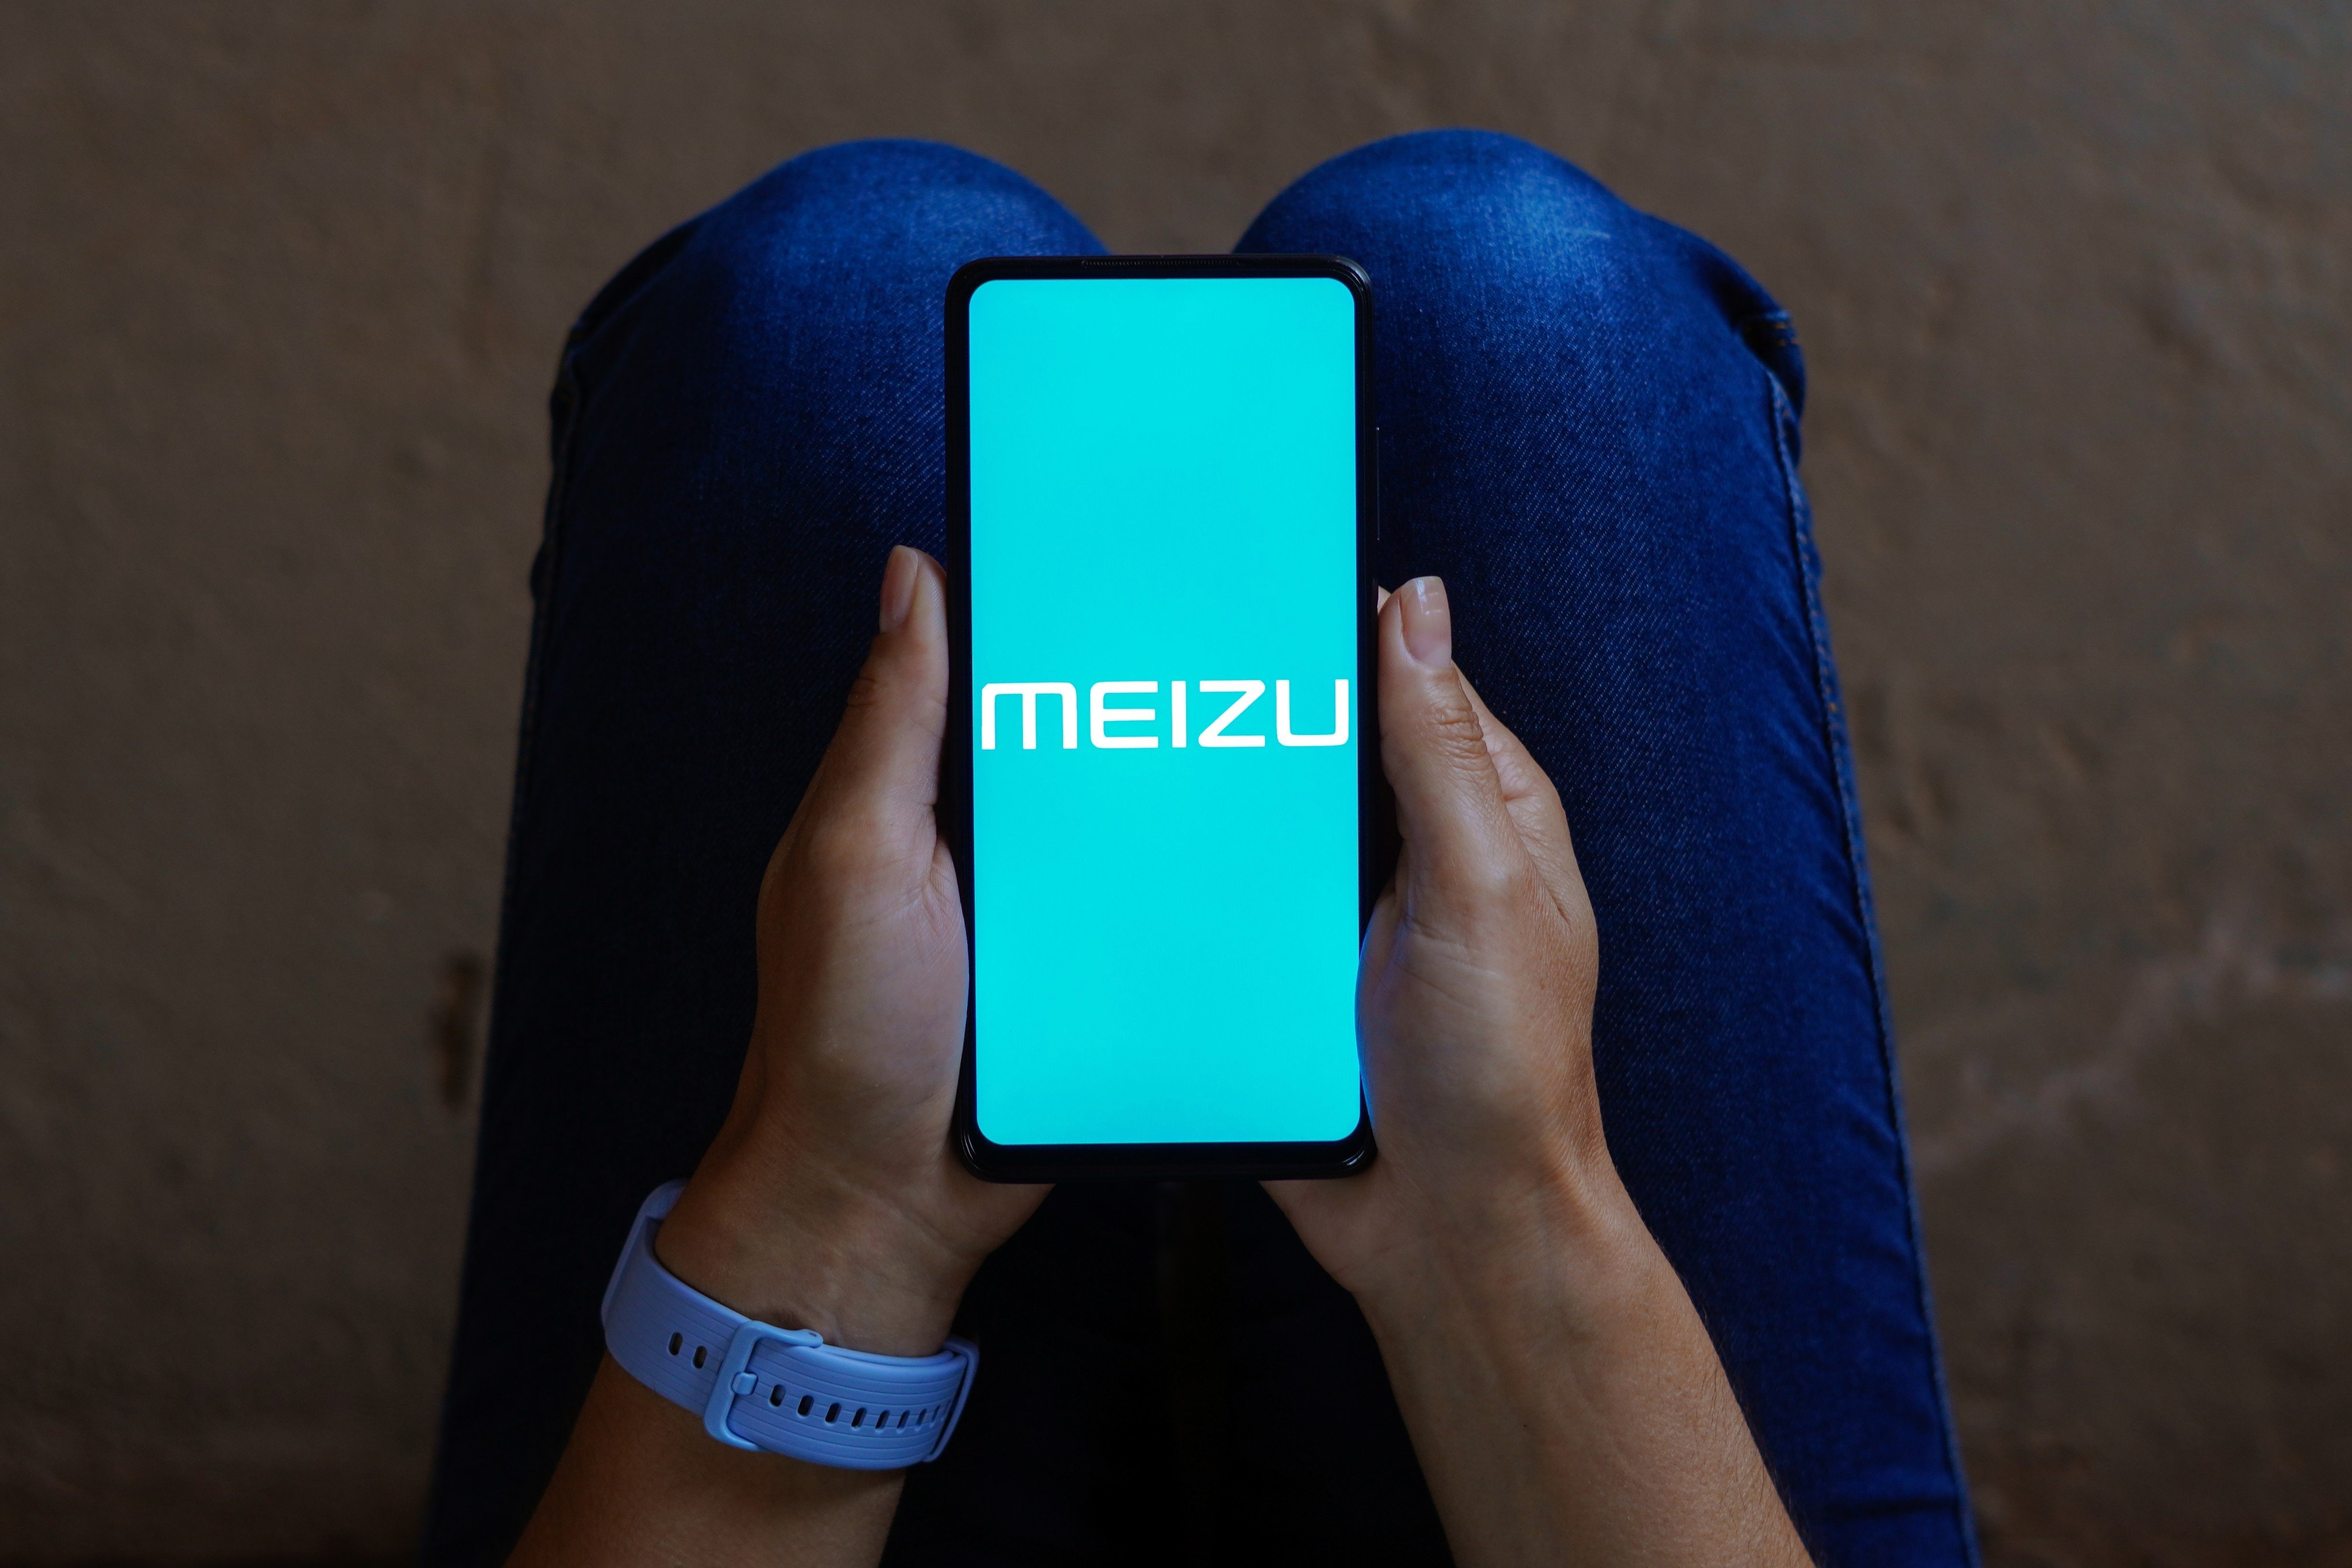 DreamSmart, the start-up behind smartphone brand Meizu, is working with banks on a potential IPO in Hong Kong this year. Photo: Shutterstock